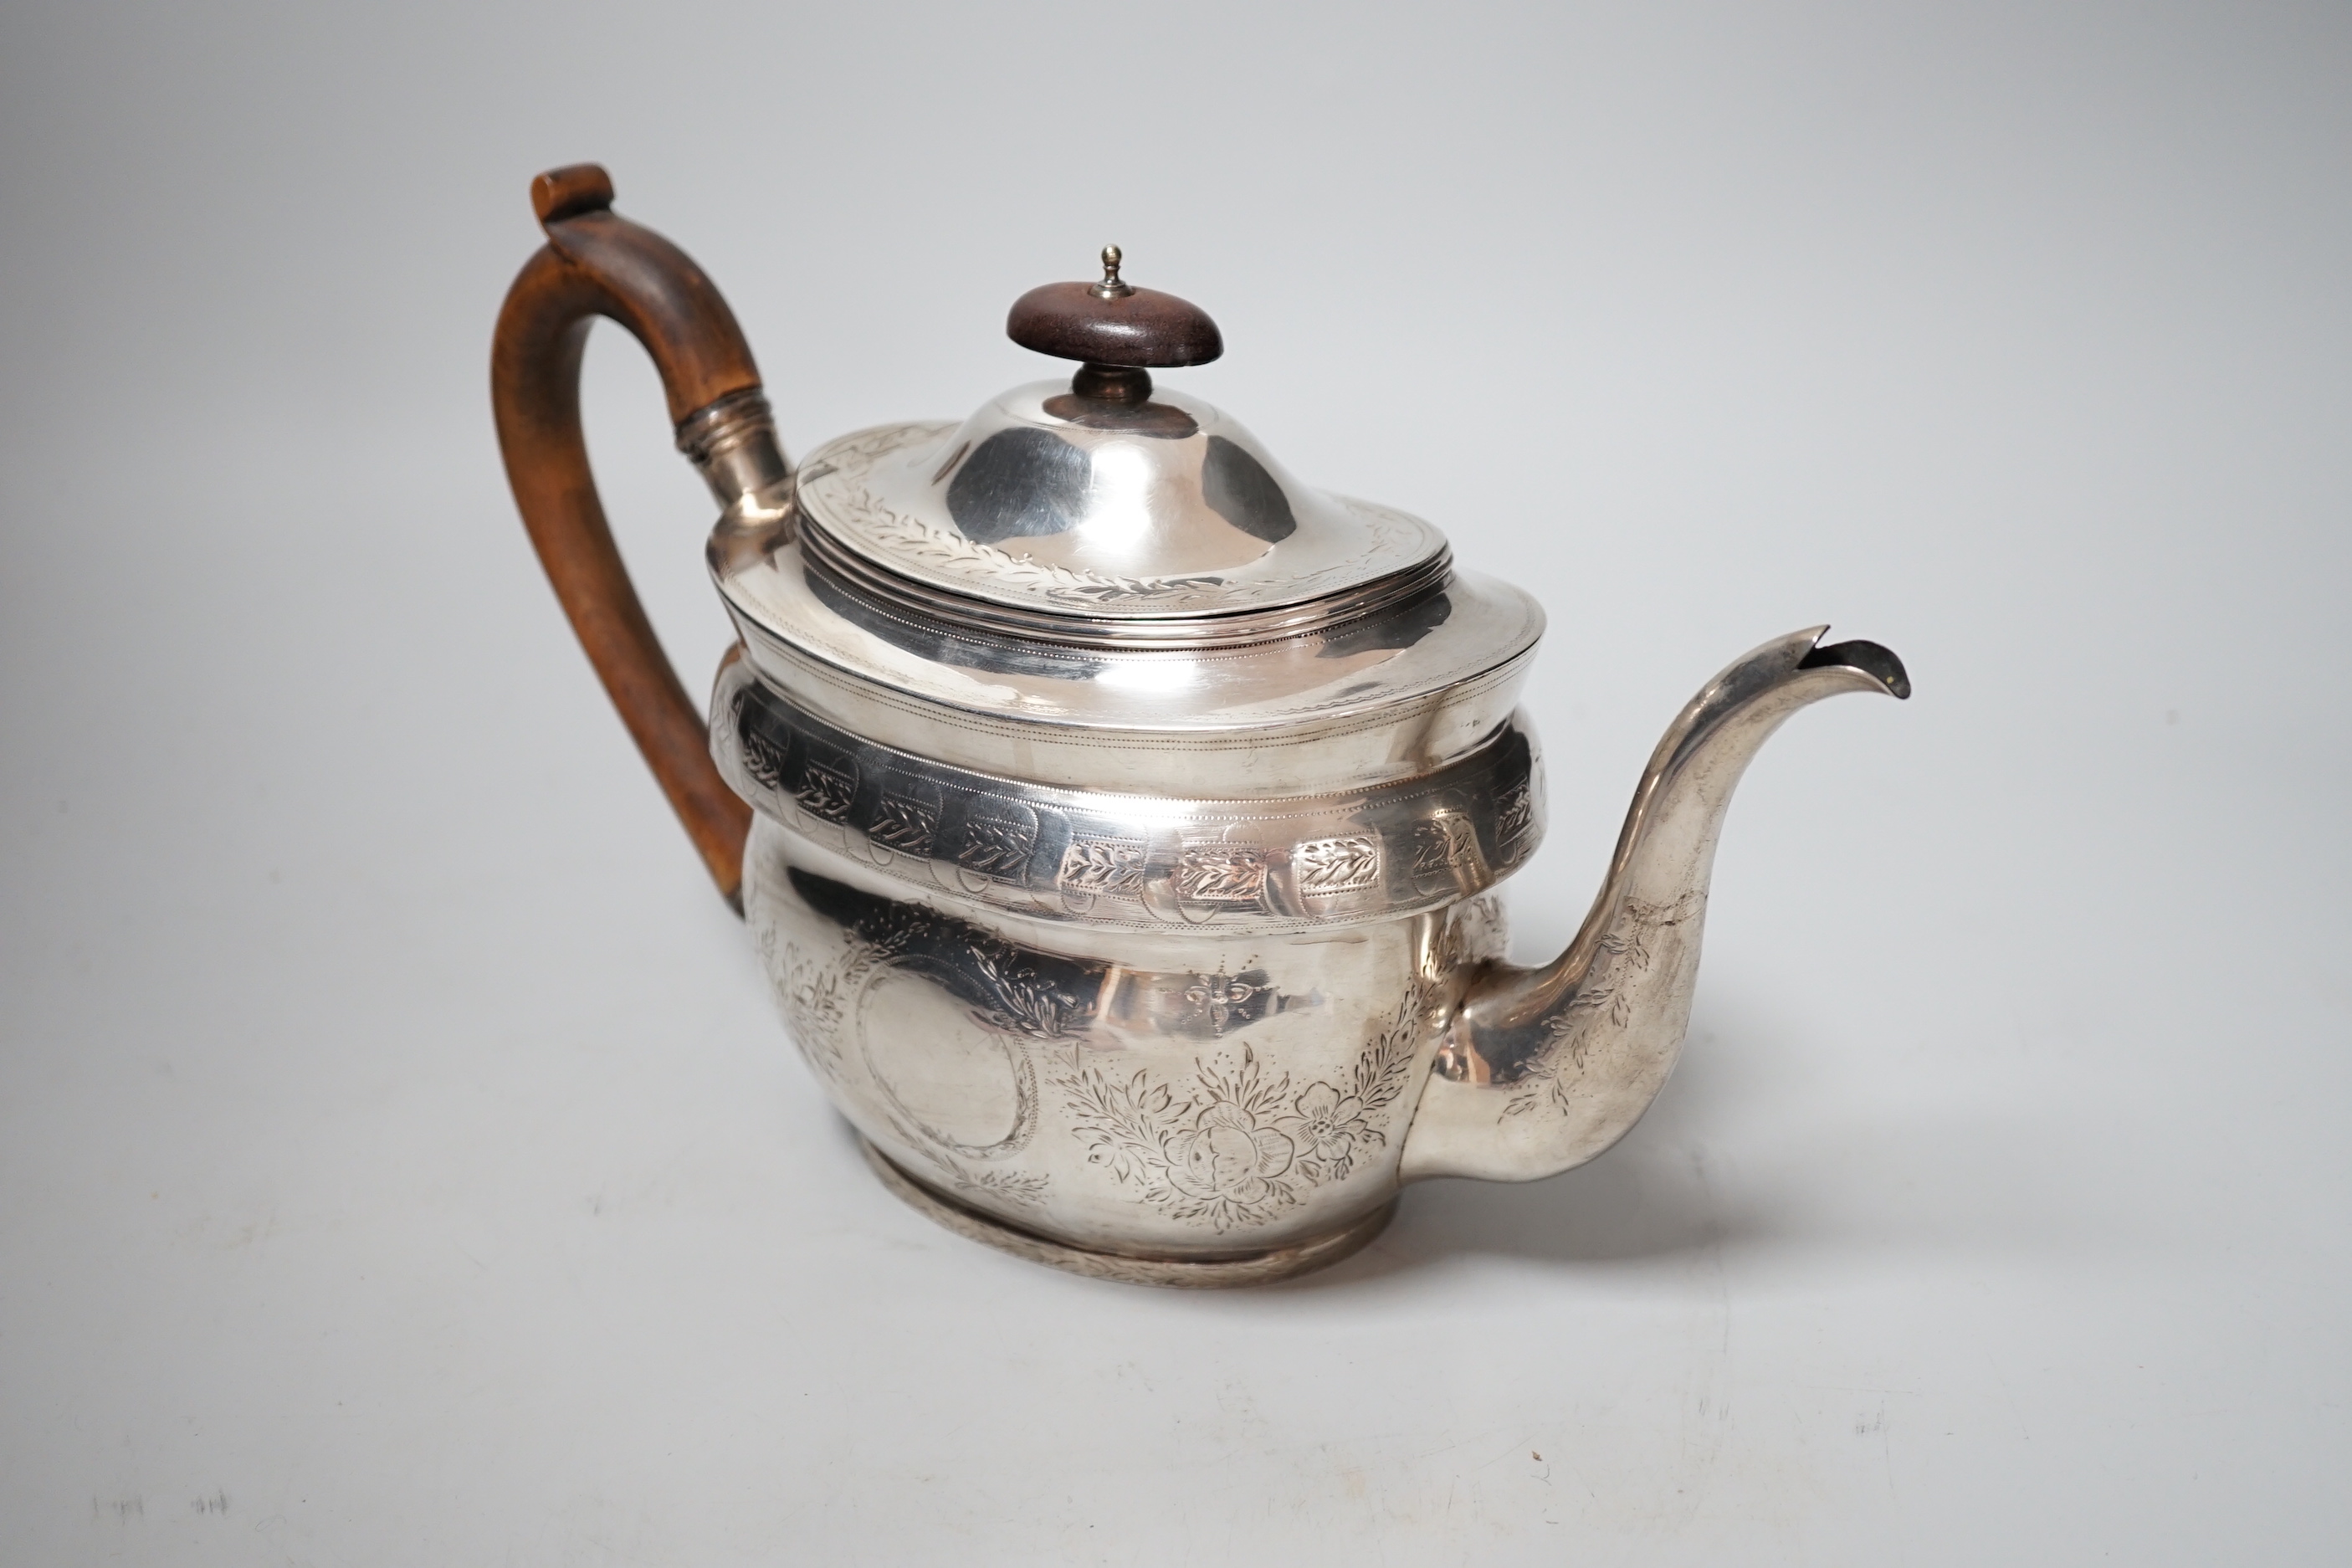 A George III engraved silver oval teapot, by Robert & Samuel Hennell, London, 1803, (repairs), gross weight 12.7oz.